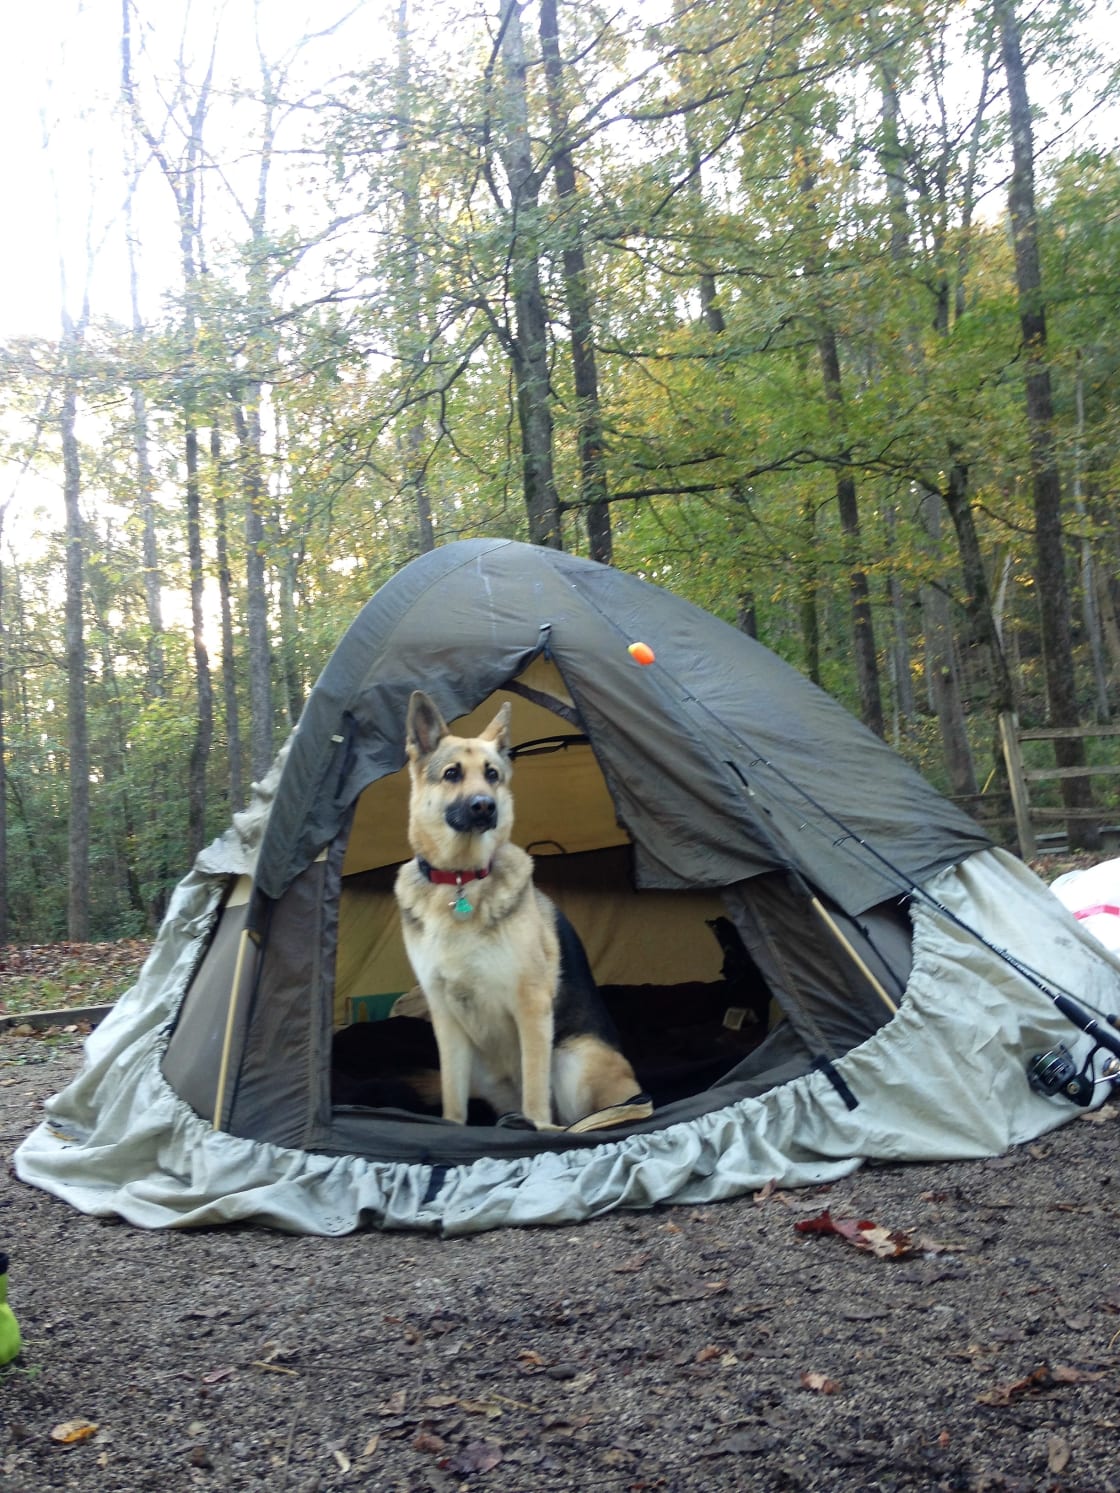 One of our 2 dogs enjoying the pet-friendly campgrounds.